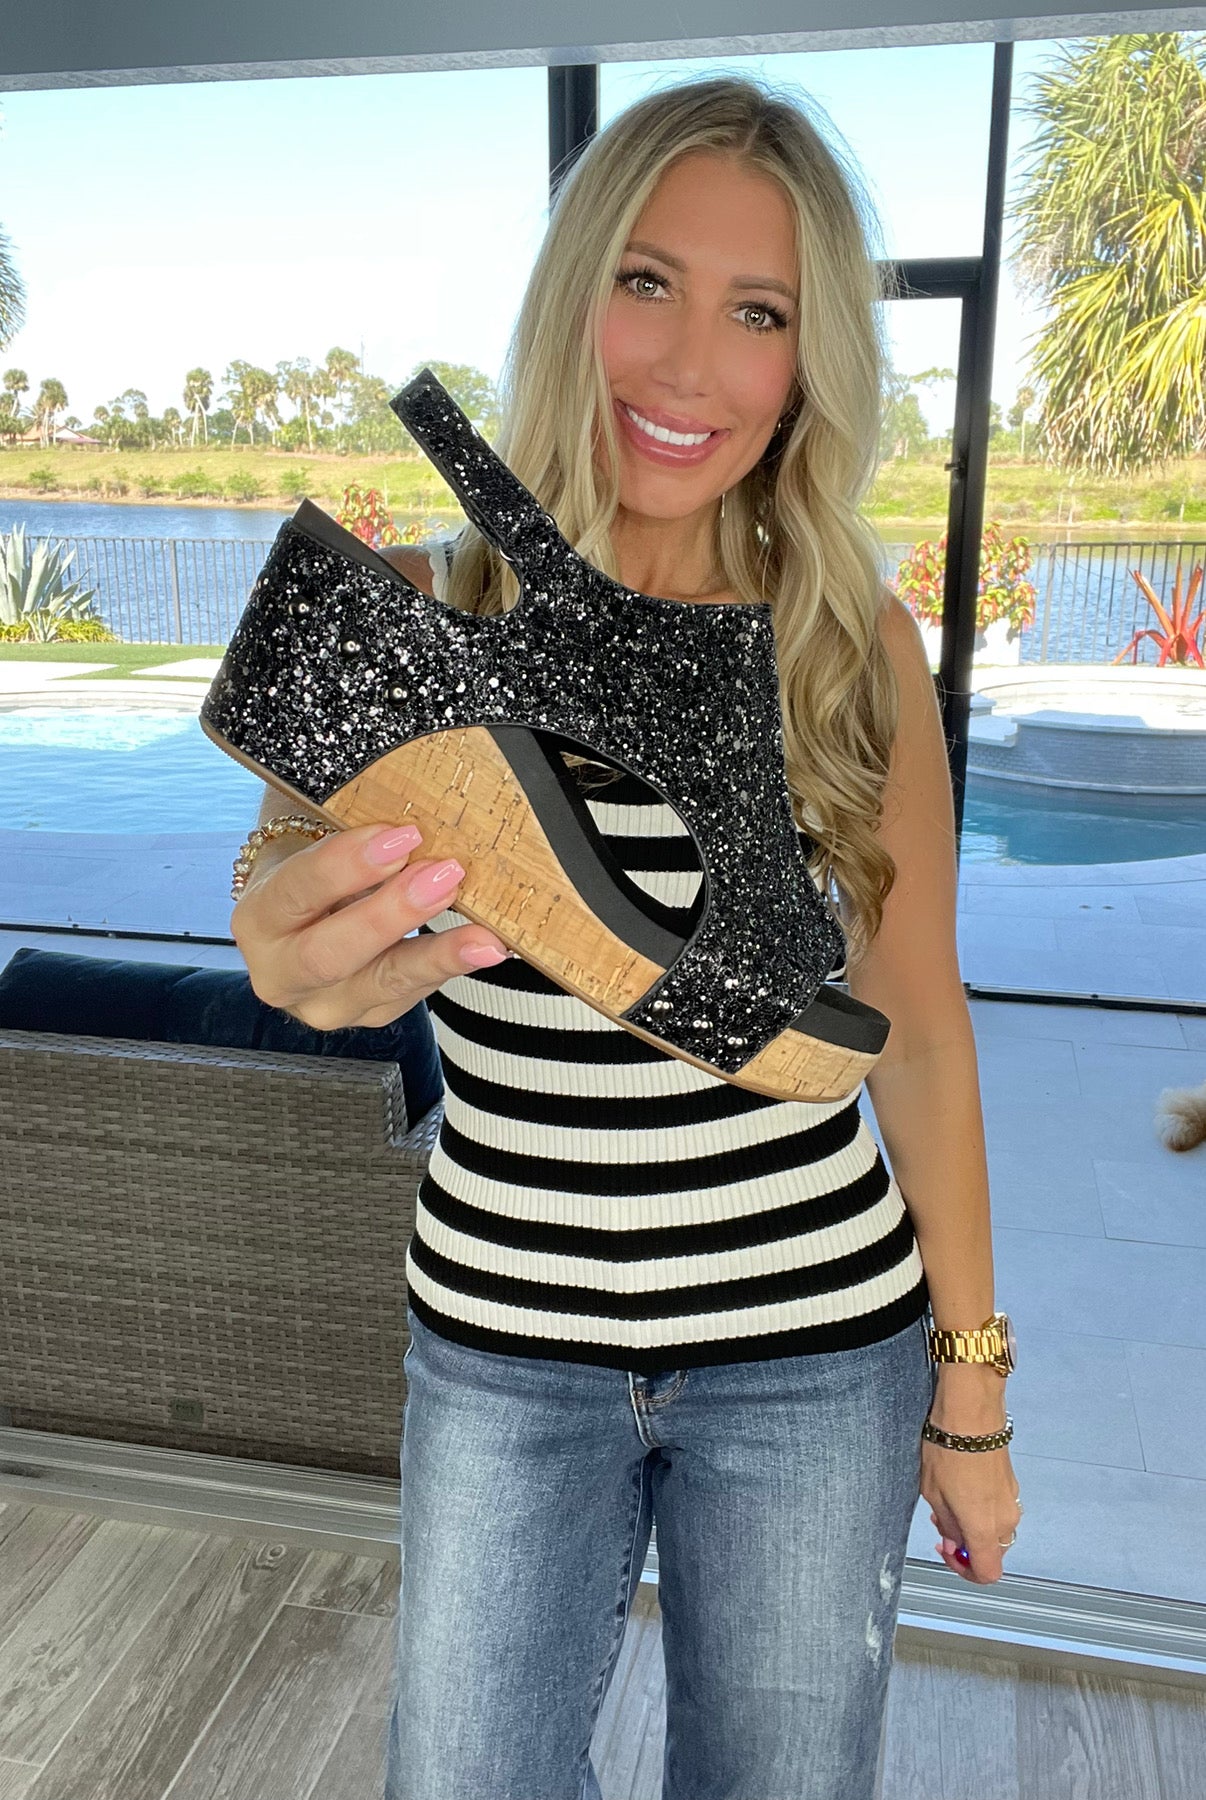 Corky's Glitter Carley Wedge-260 Shoes- Simply Simpson's Boutique is a Women's Online Fashion Boutique Located in Jupiter, Florida